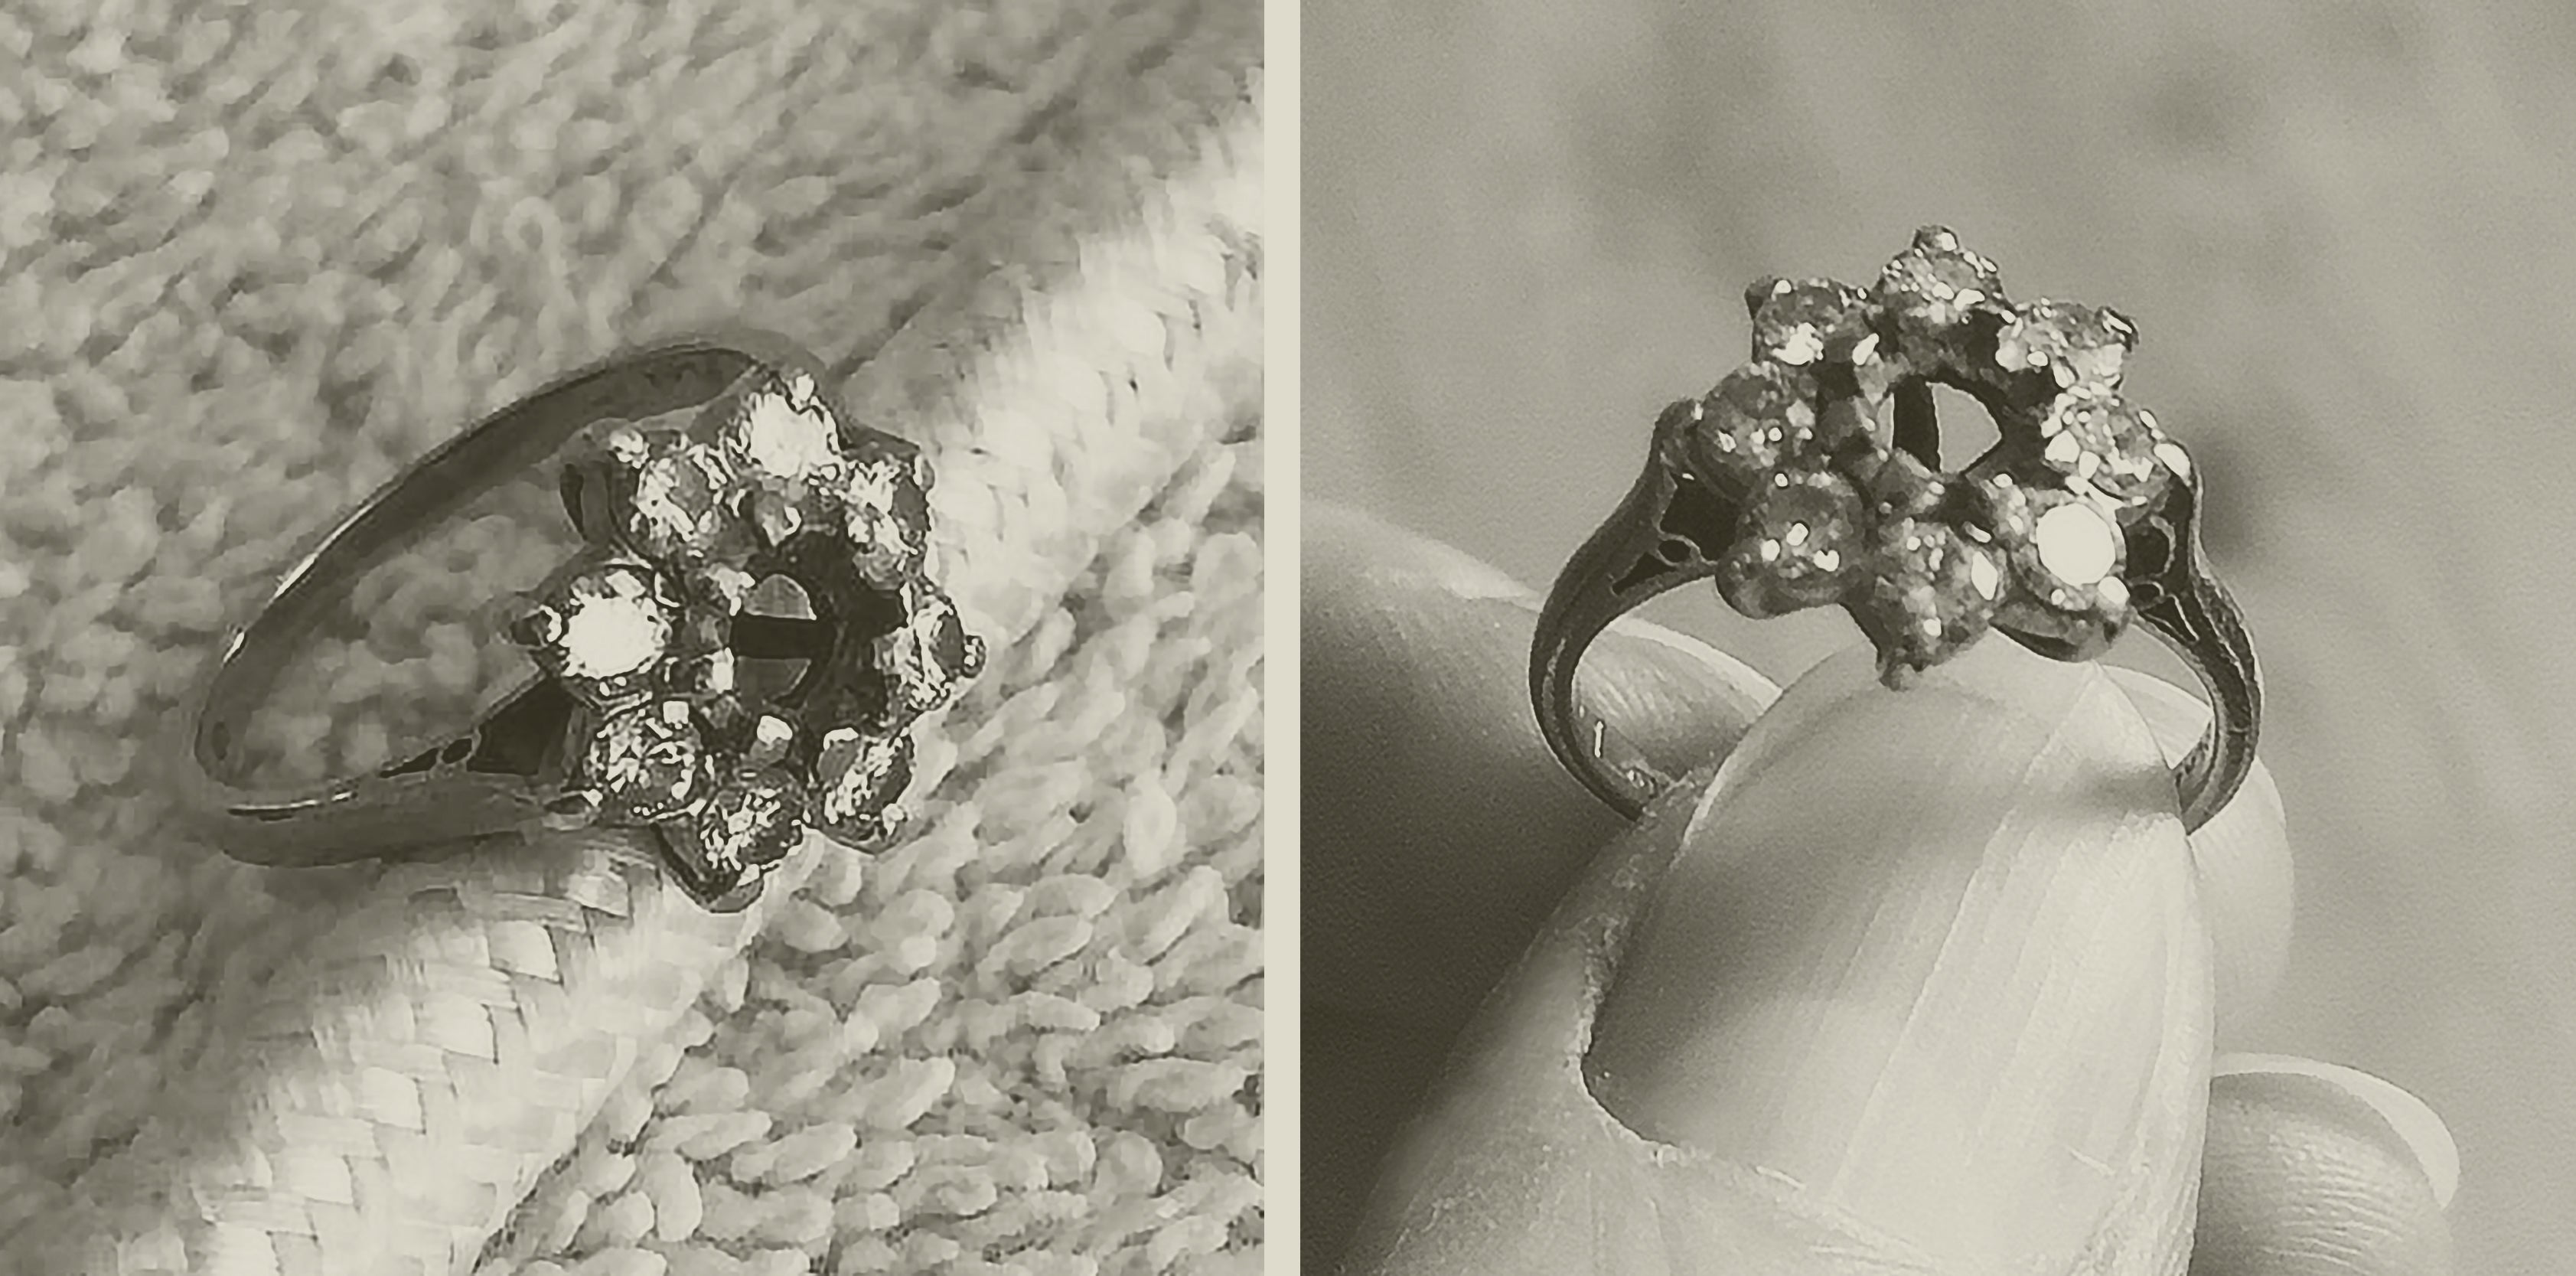 The story so far ~ Rosie's remodeled 'twinkly' ring